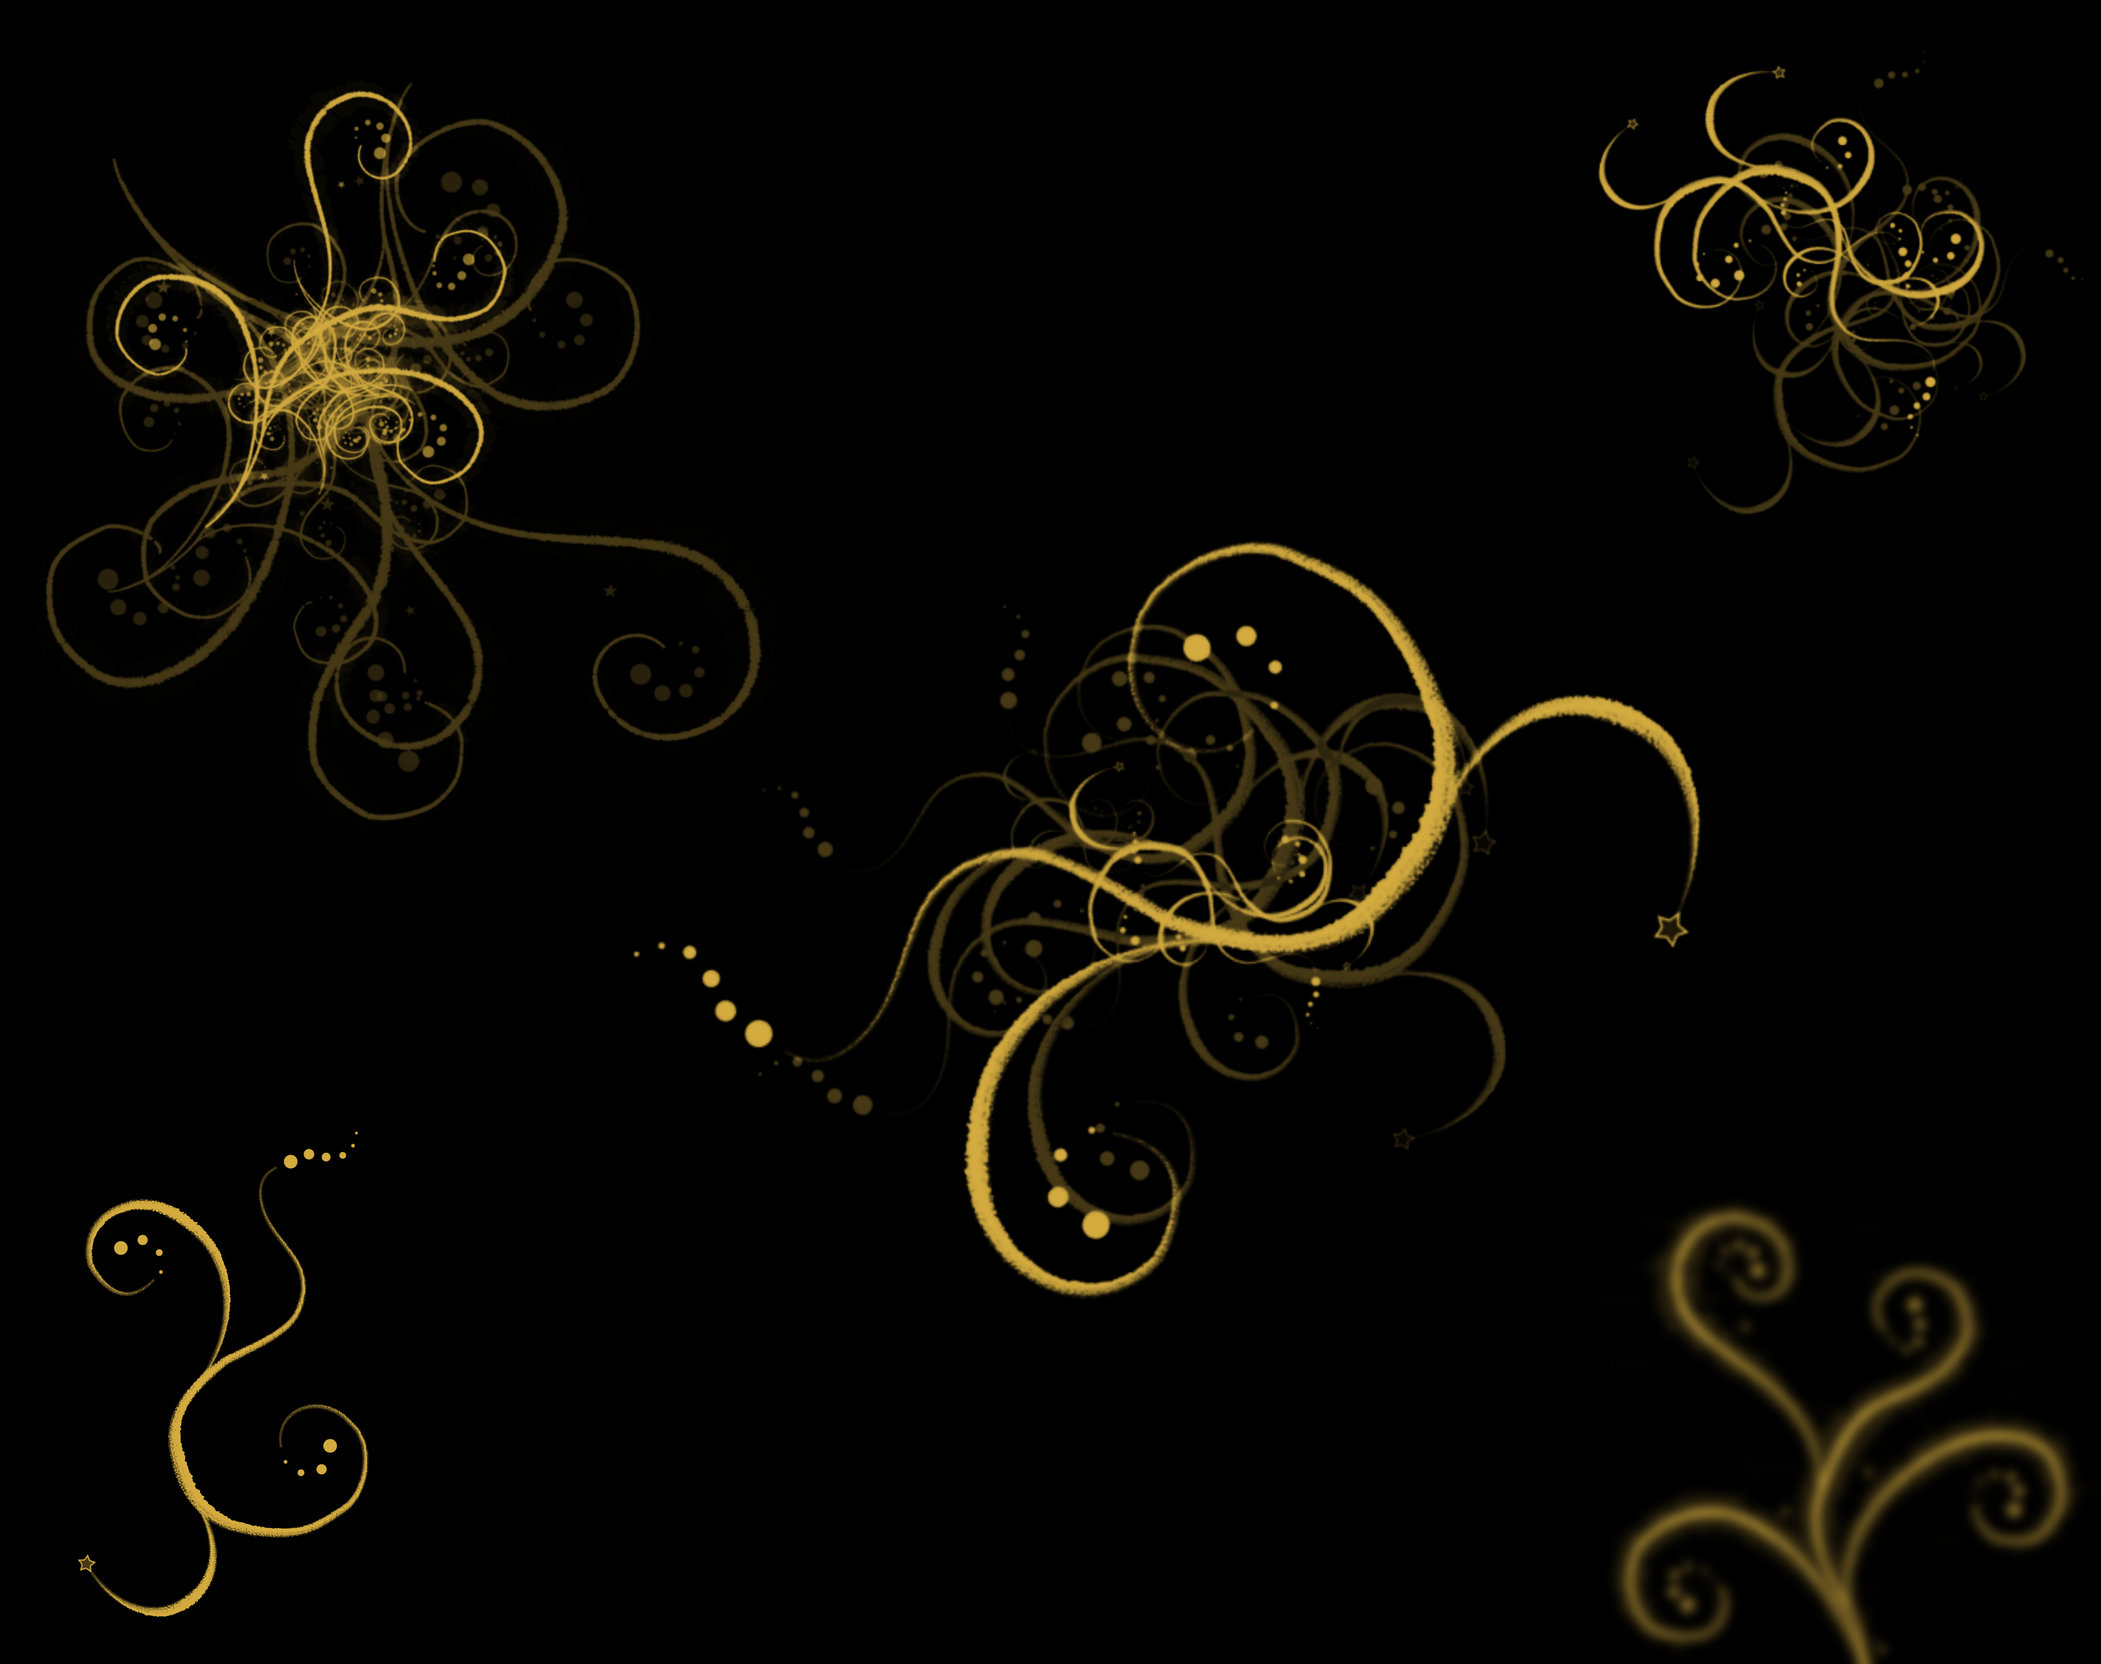 Abstract Iphone 5 Design Backgournd Mobile Black And Gold Wallpaper